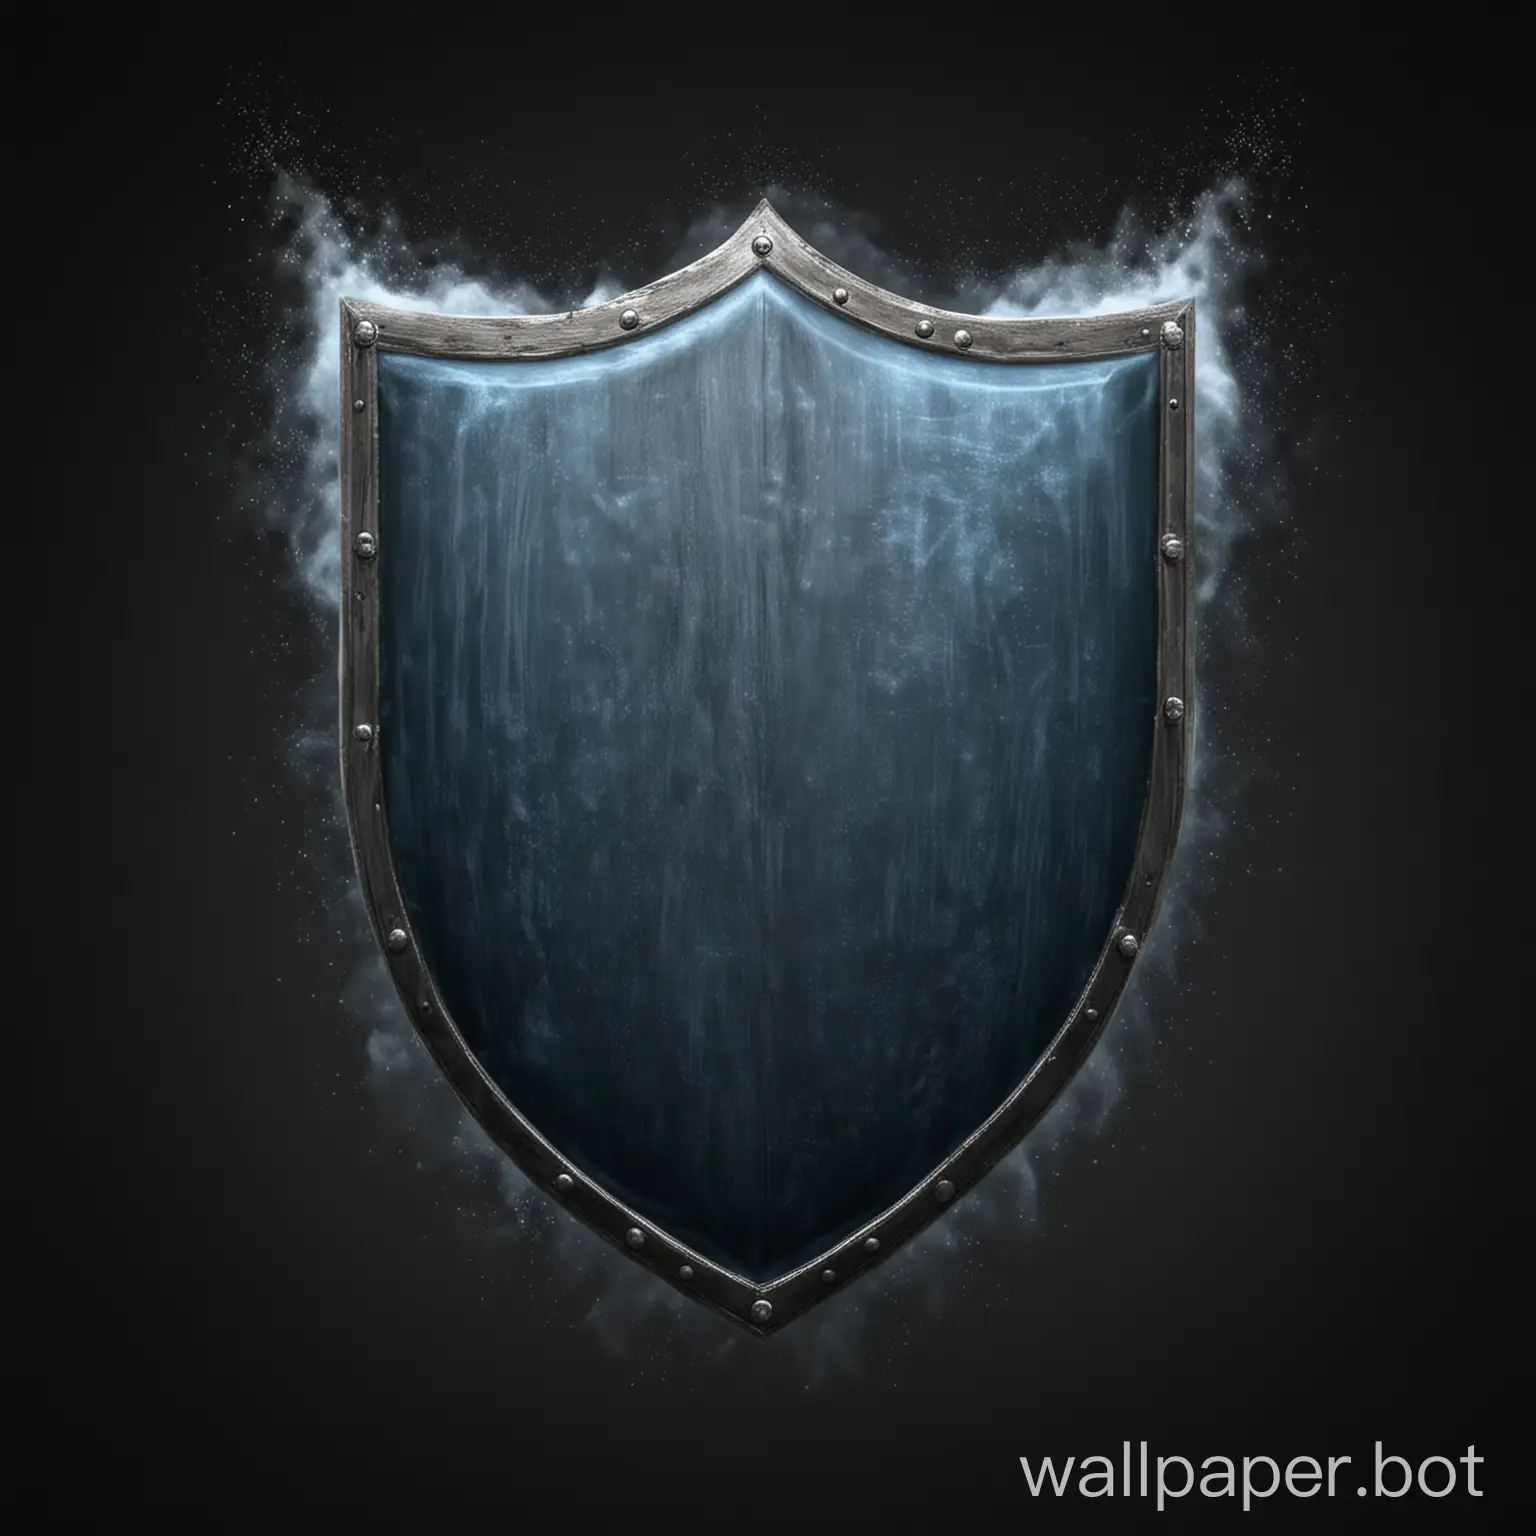 draw a cluster of gray-blue mist in the shape of a shield on a black background